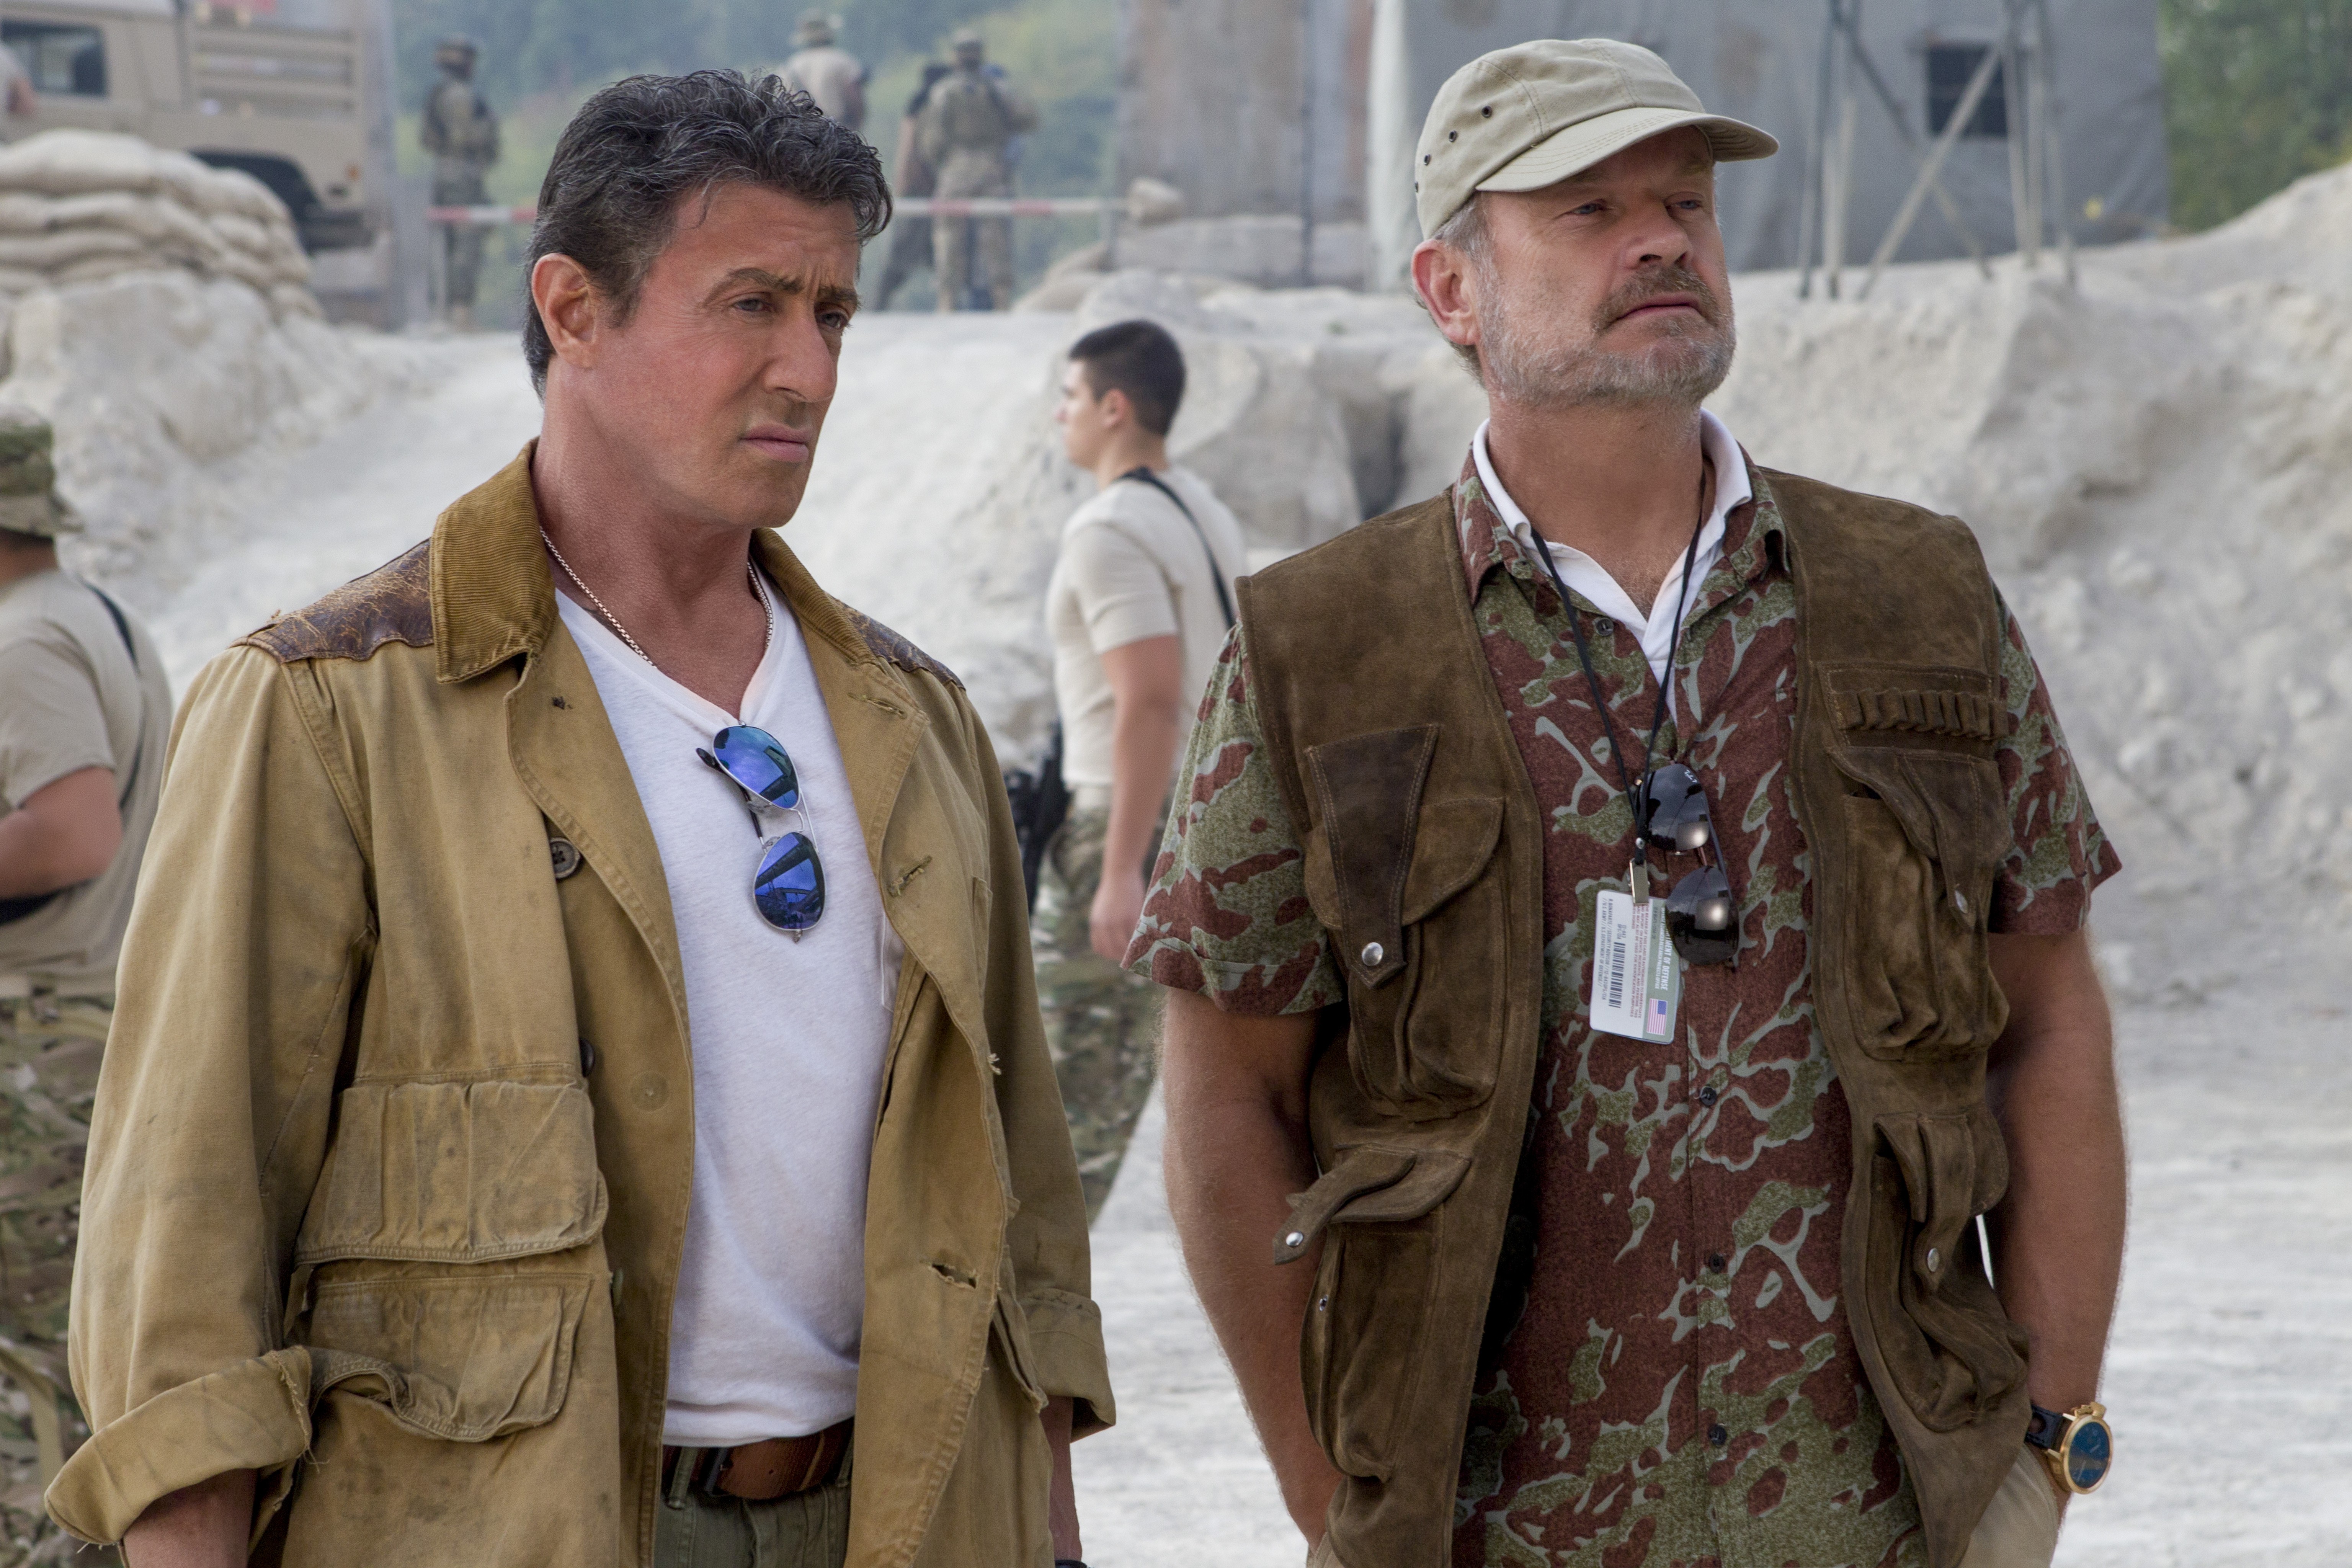 movie, the expendables 3, barney ross, bonaparte (the expendables), kelsey grammer, sylvester stallone, the expendables cellphone